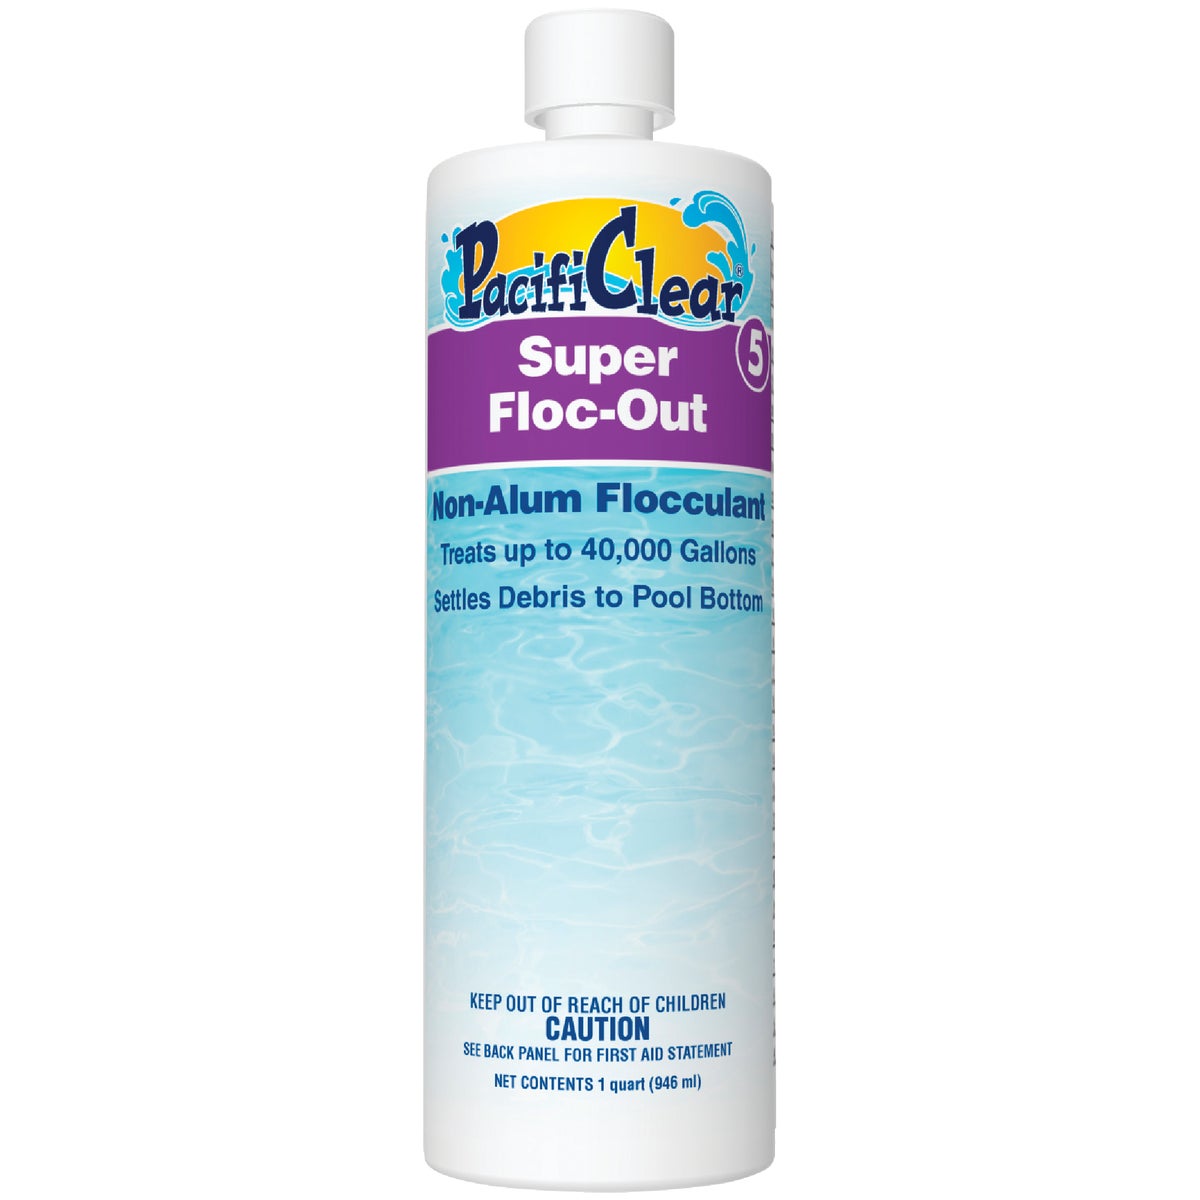 Item 800510, Super Floc Out produces sparkling, clear water.